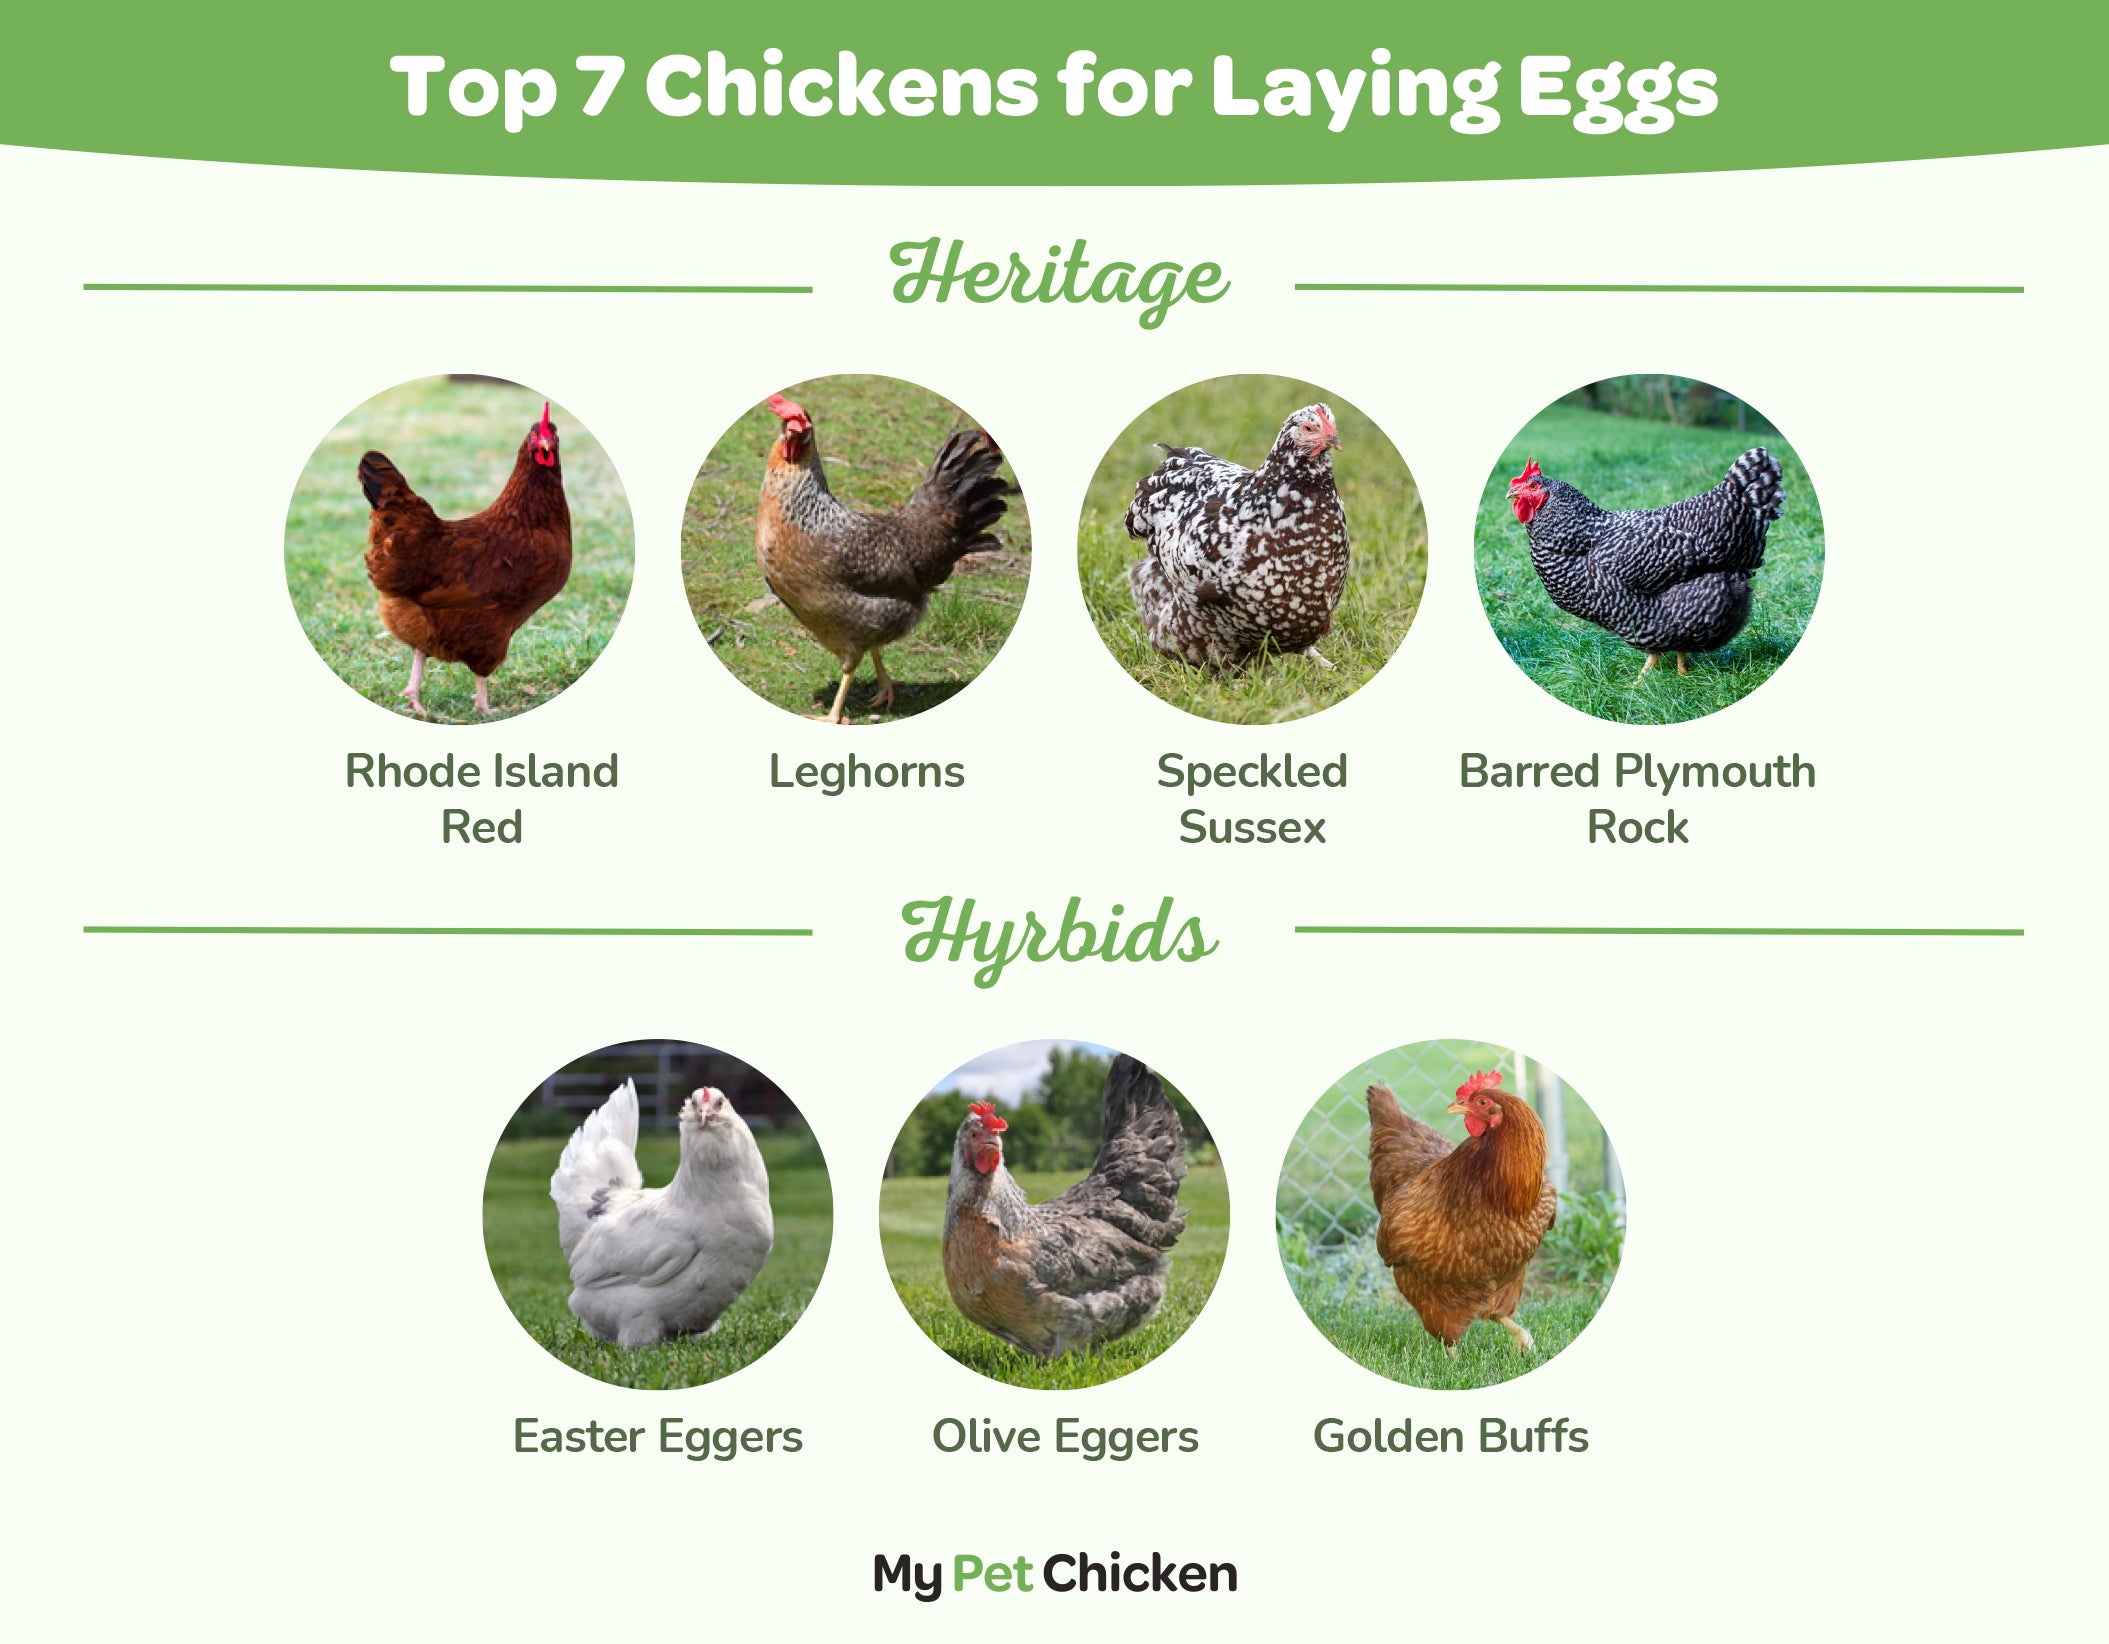 We offer the best chickens for laying eggs including heritage and hybrid breeds. 